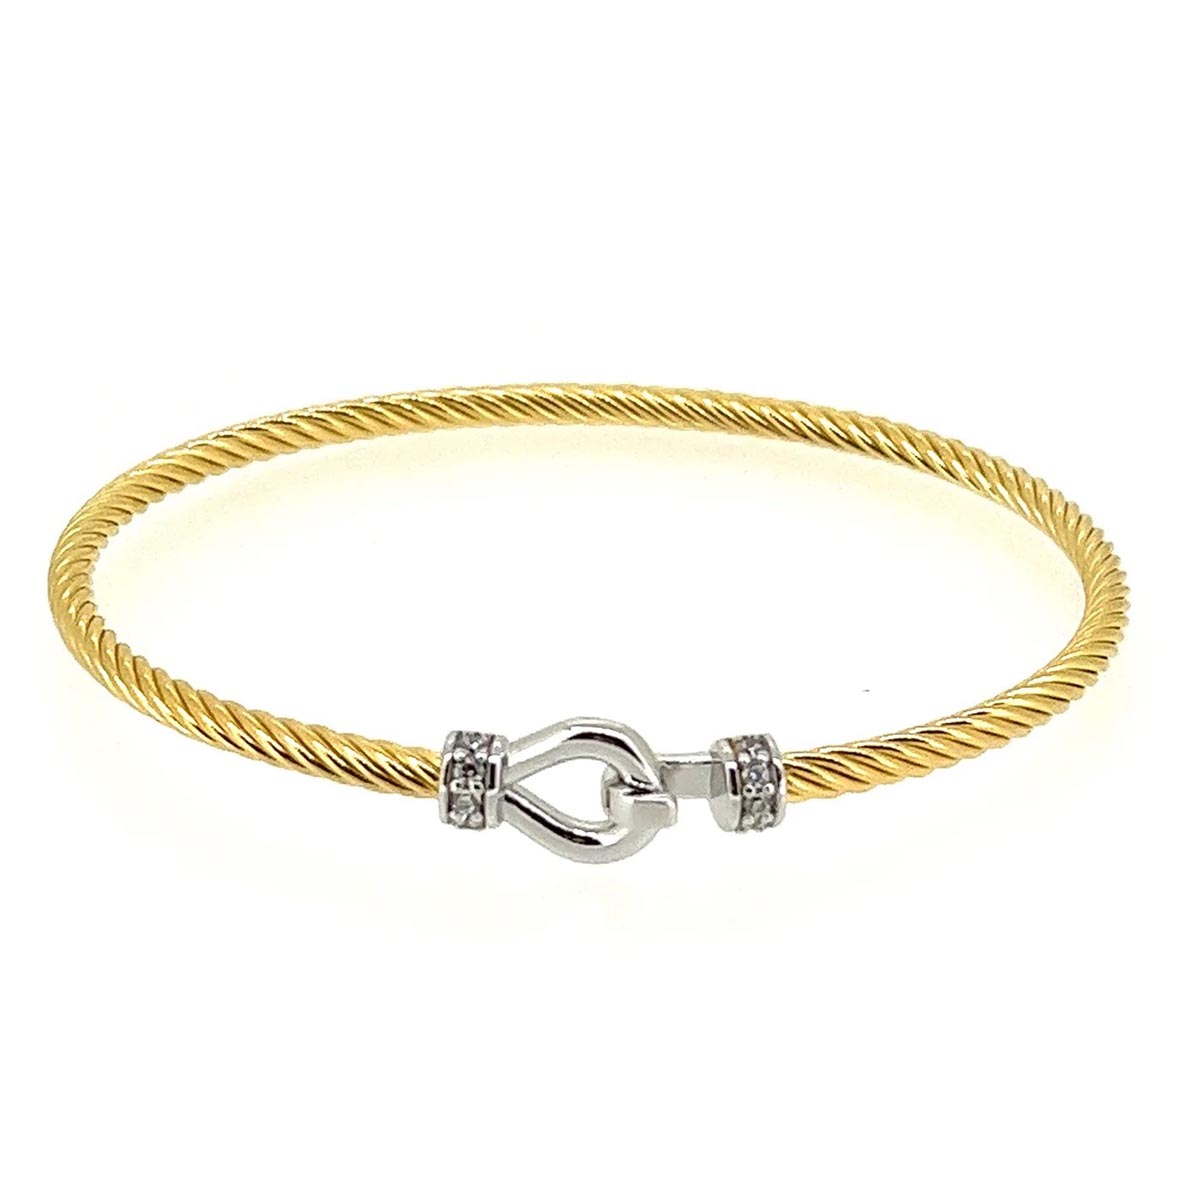 Bella Cavo Cubic Zirconia Hook Clasp Bangle Bracelet in Sterling Silver and Yellow Gold Plate